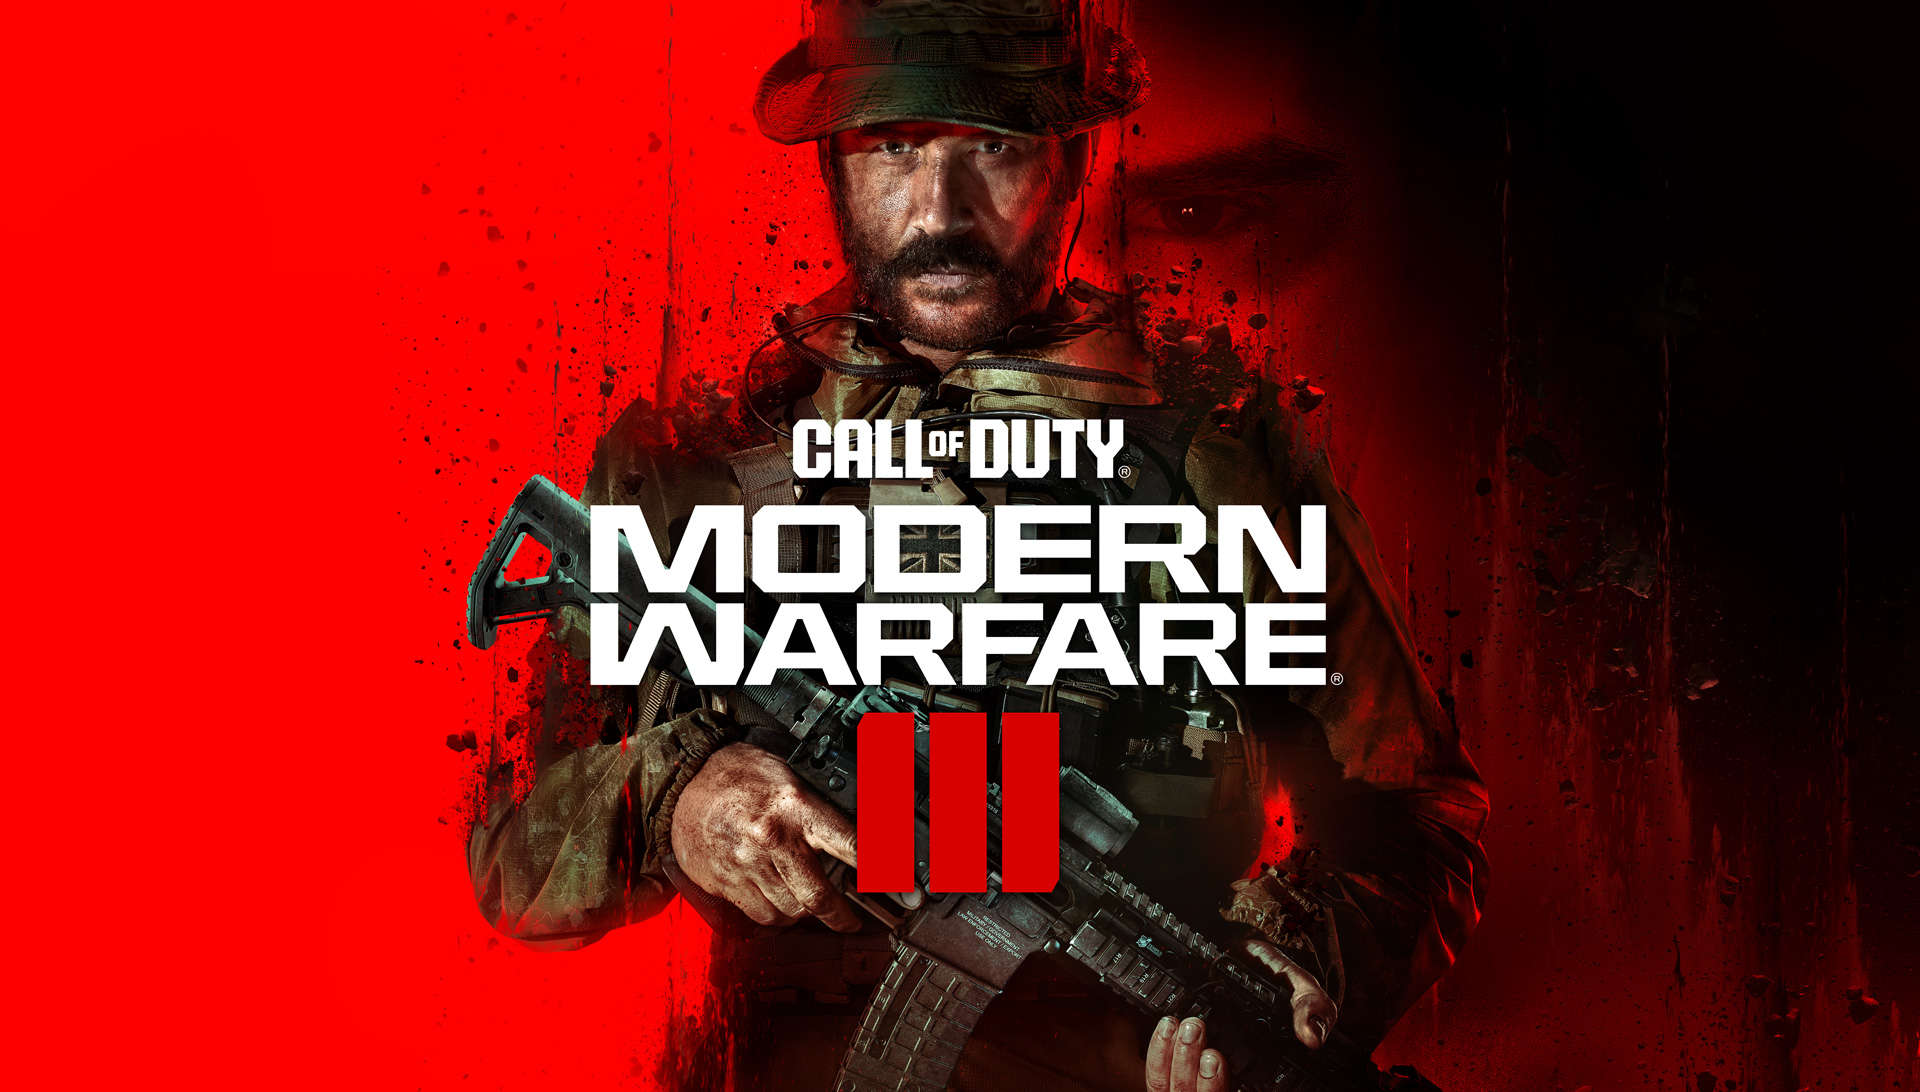 Live trailer for “The Lobby” for Call of Duty: Modern Warfare III